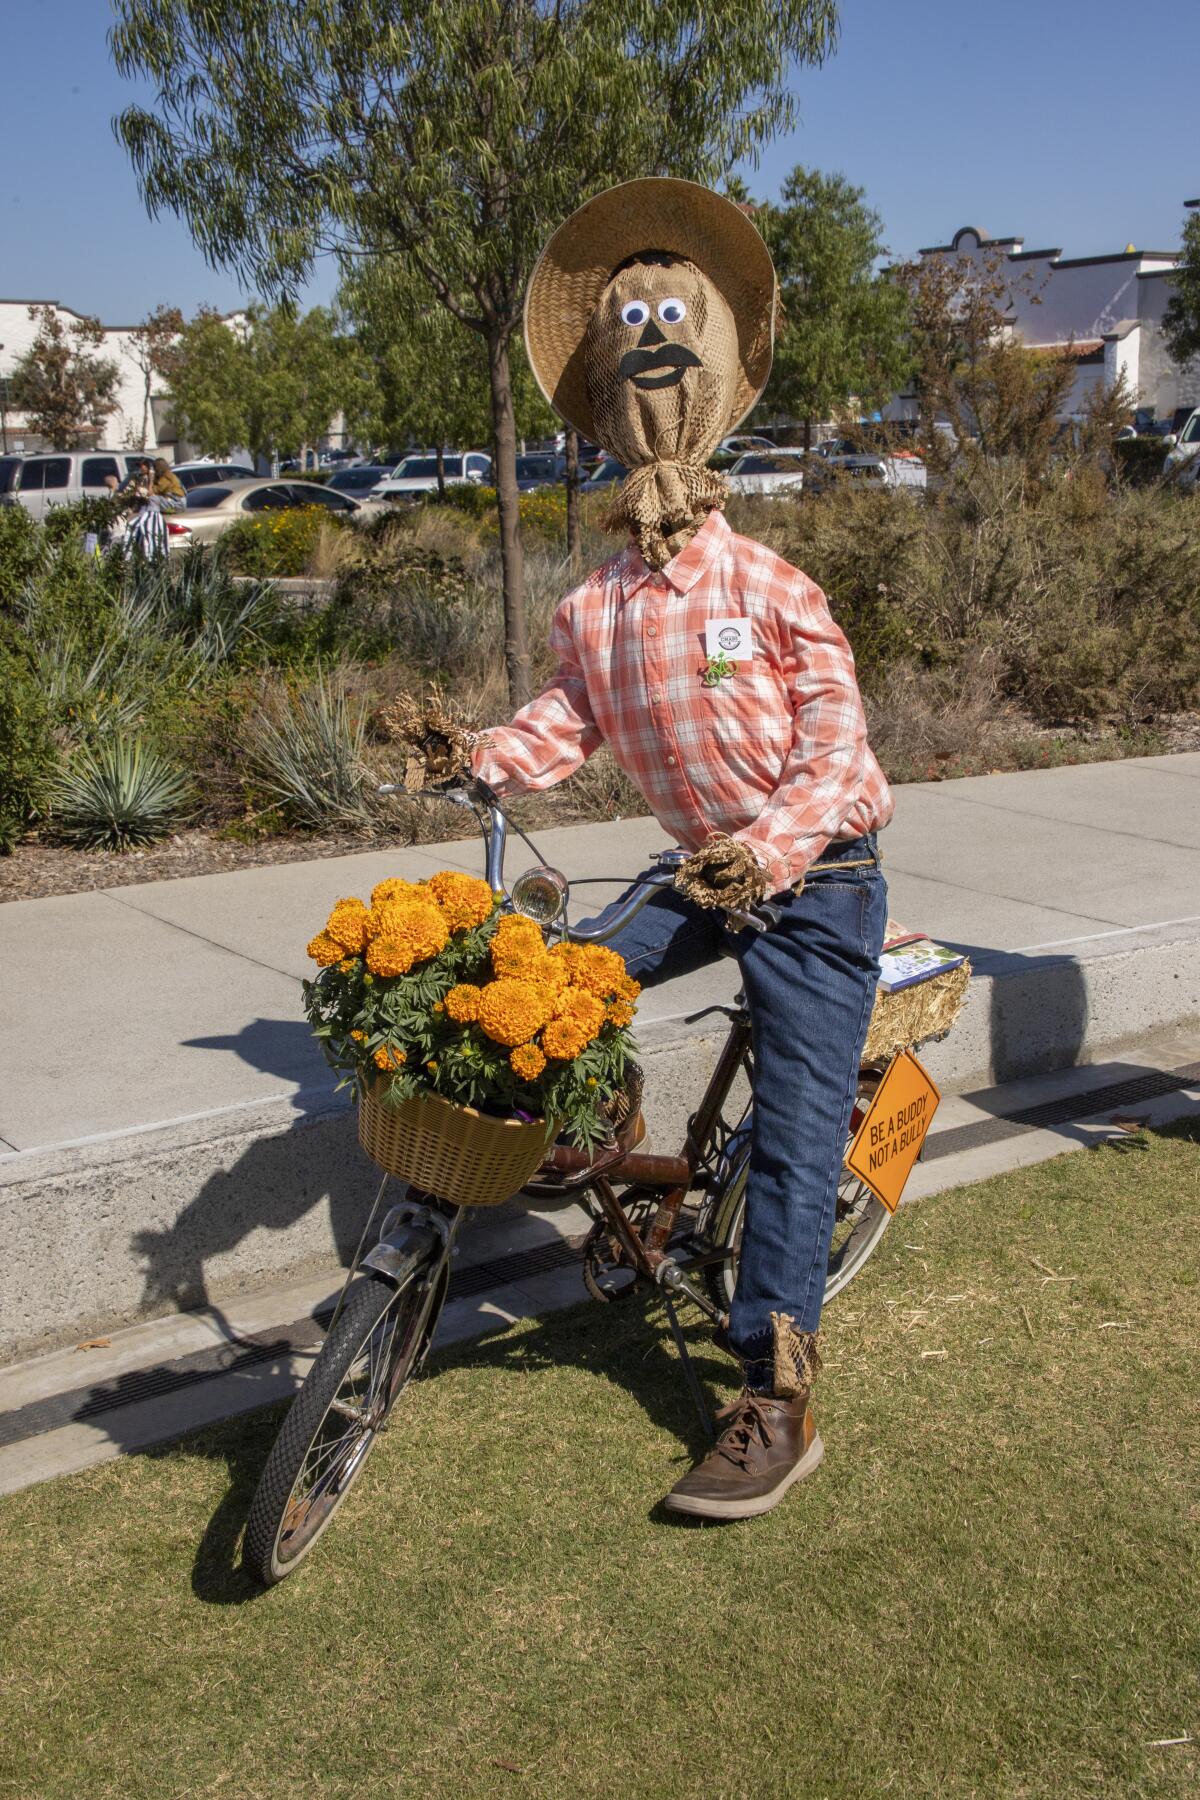 A scarecrow entry from  the Costa Mesa Alliance for Better Streets at the city's annual Scarecrow Festival at Lions Park.